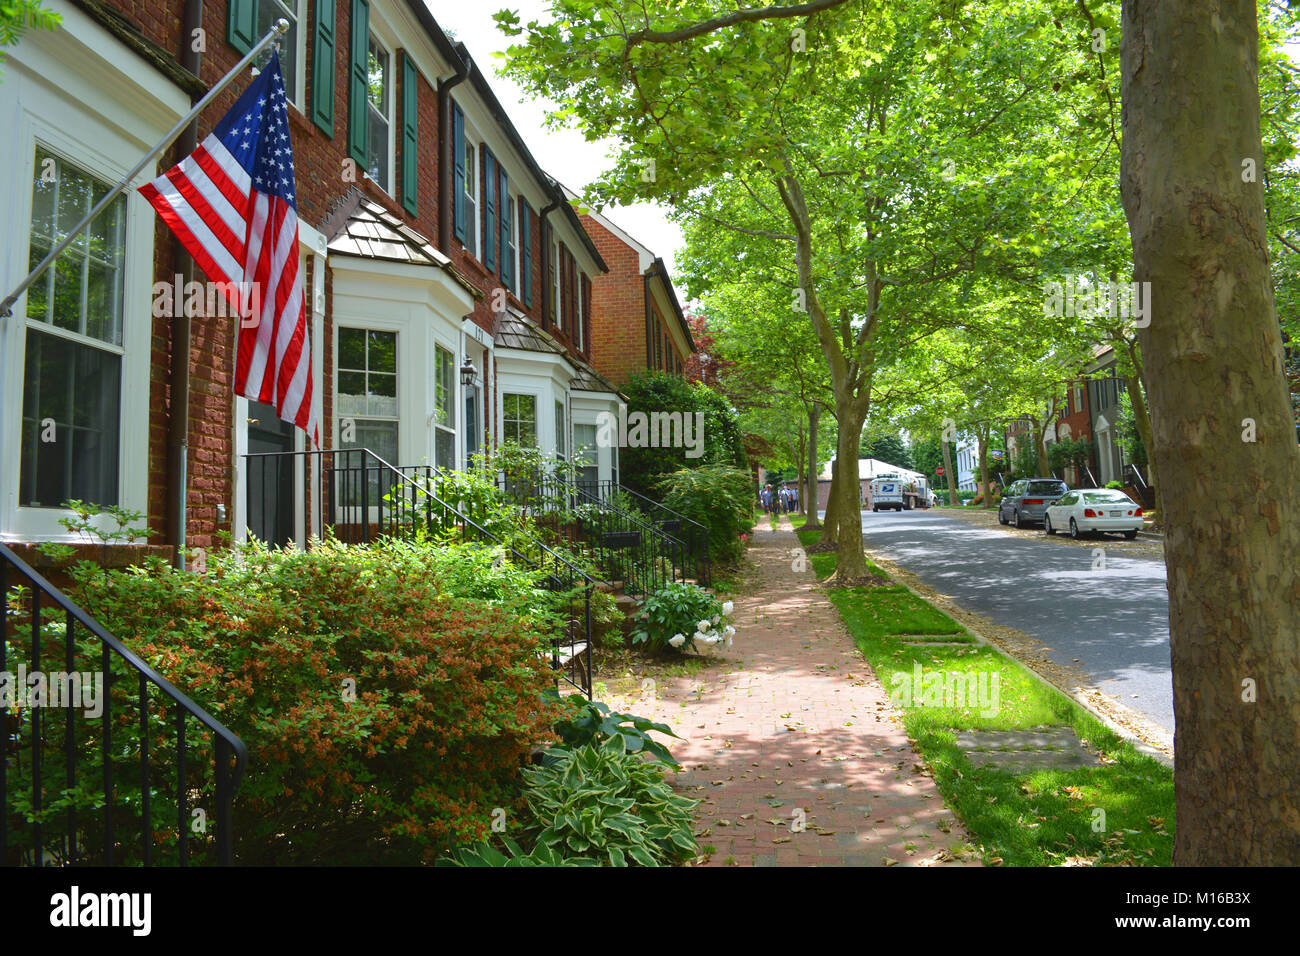 New urbanism, walkability, town, affordable housing Stock Photo